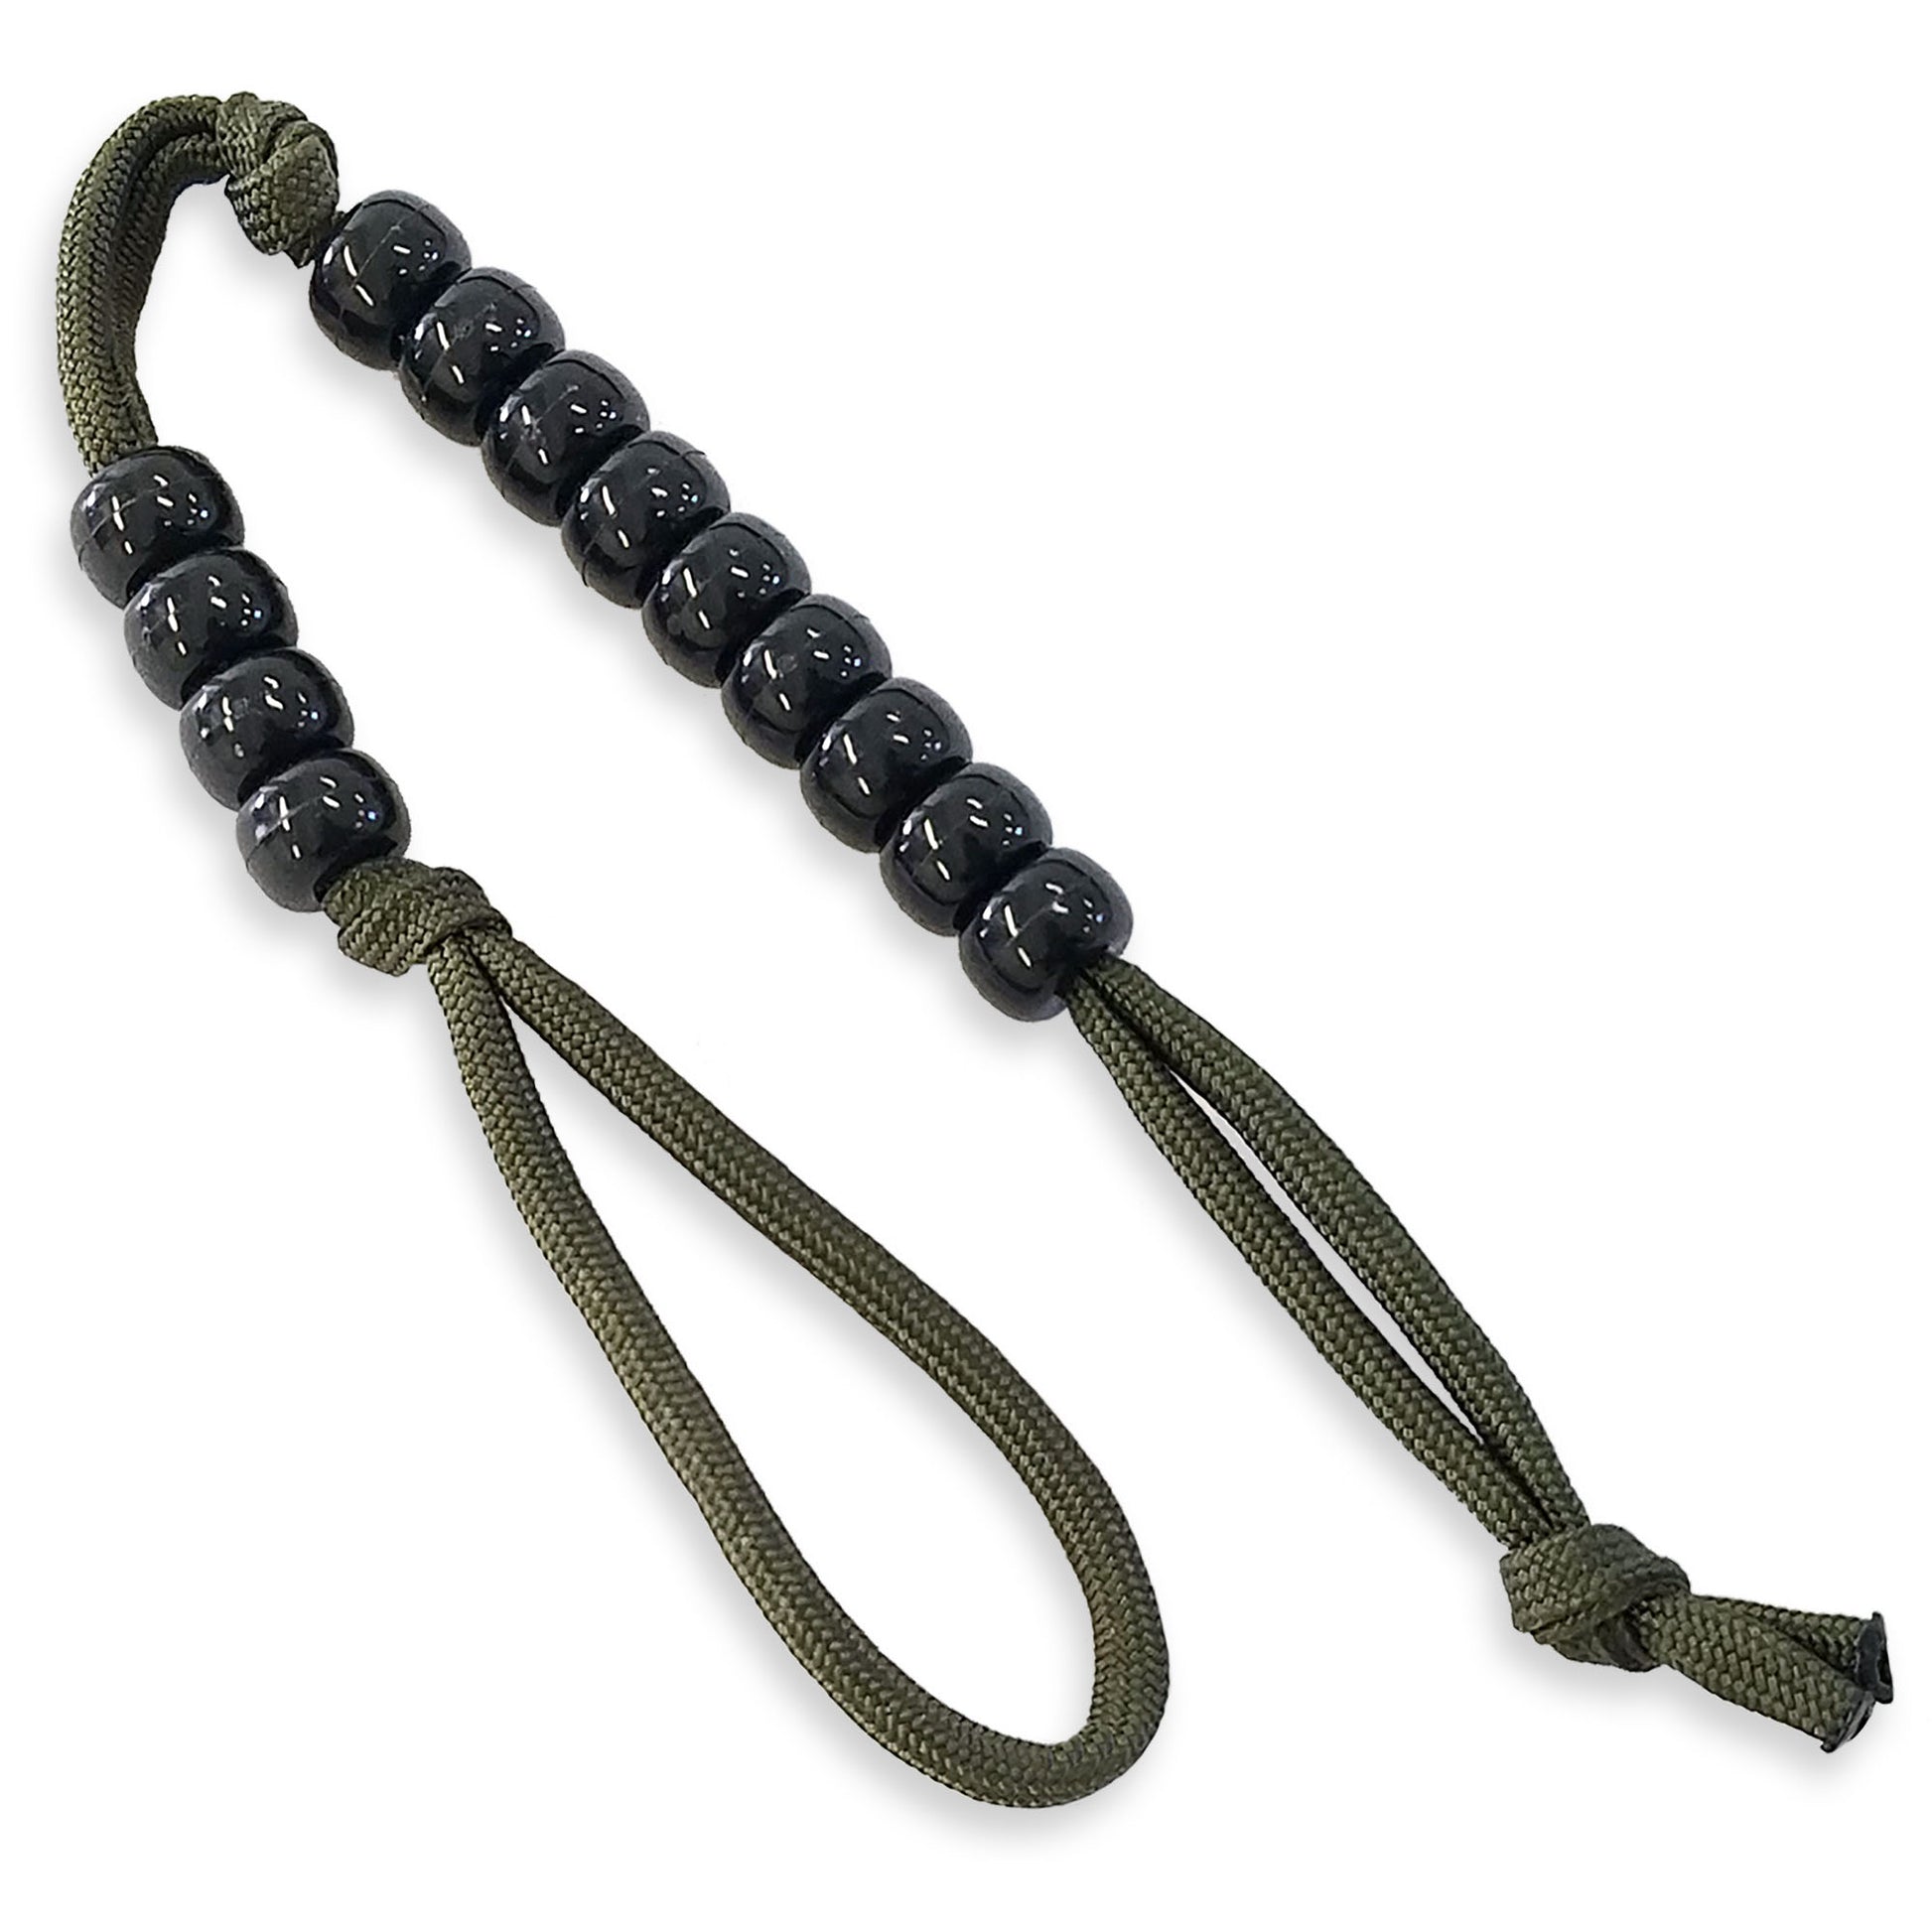 Coopers Bay Pace Count Beads [Army Ranger Beads] for Compass Land Navigation OD Green / Black